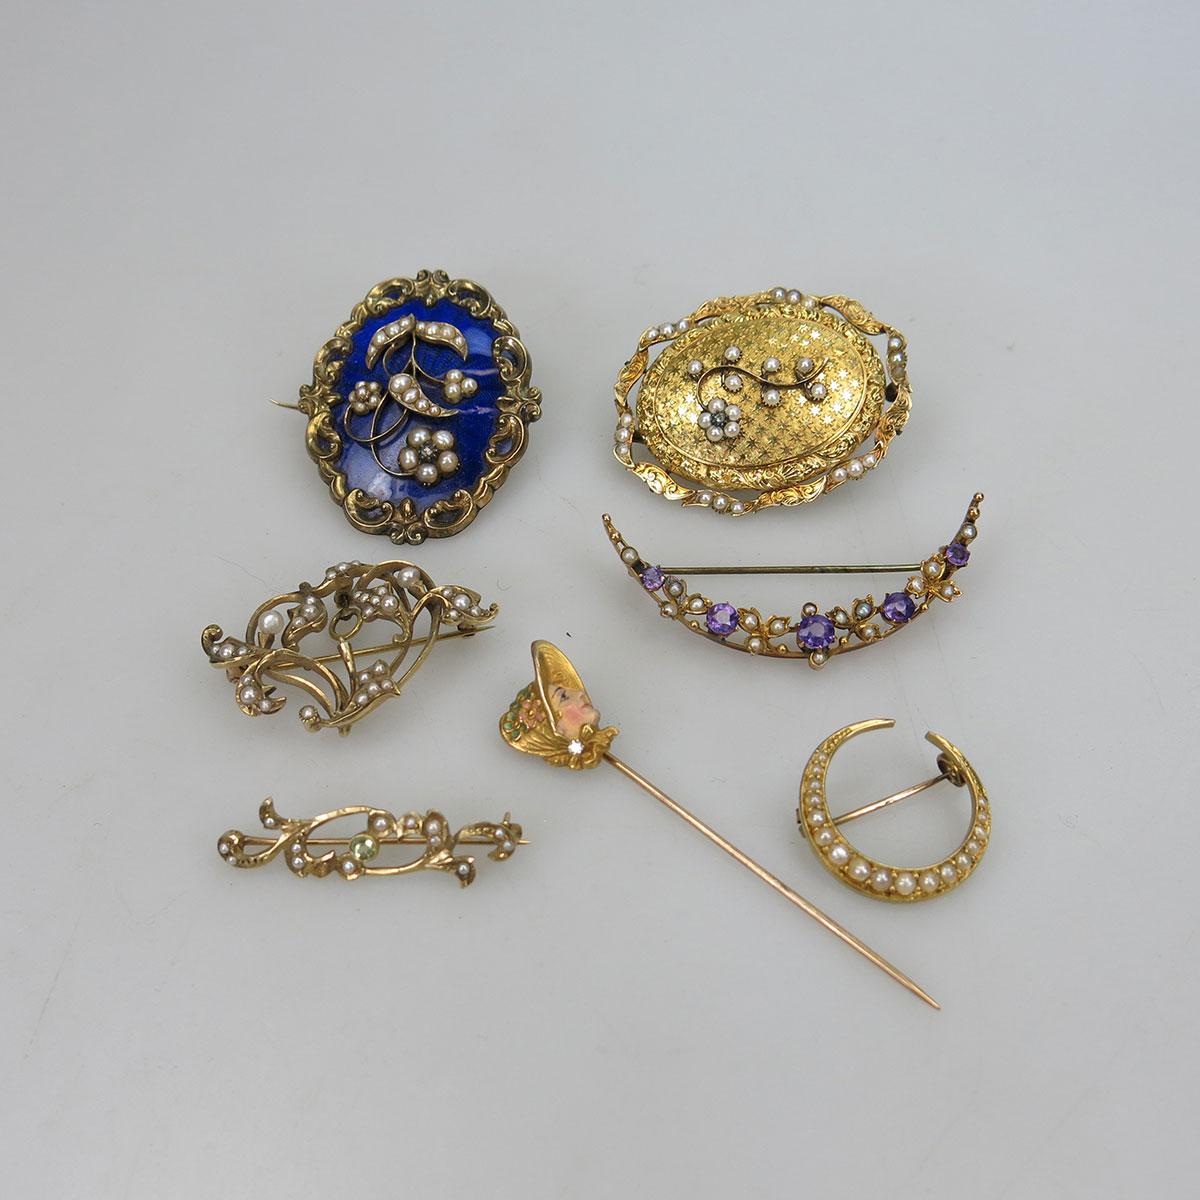 7 Various Gold And Gold-Filled Pins